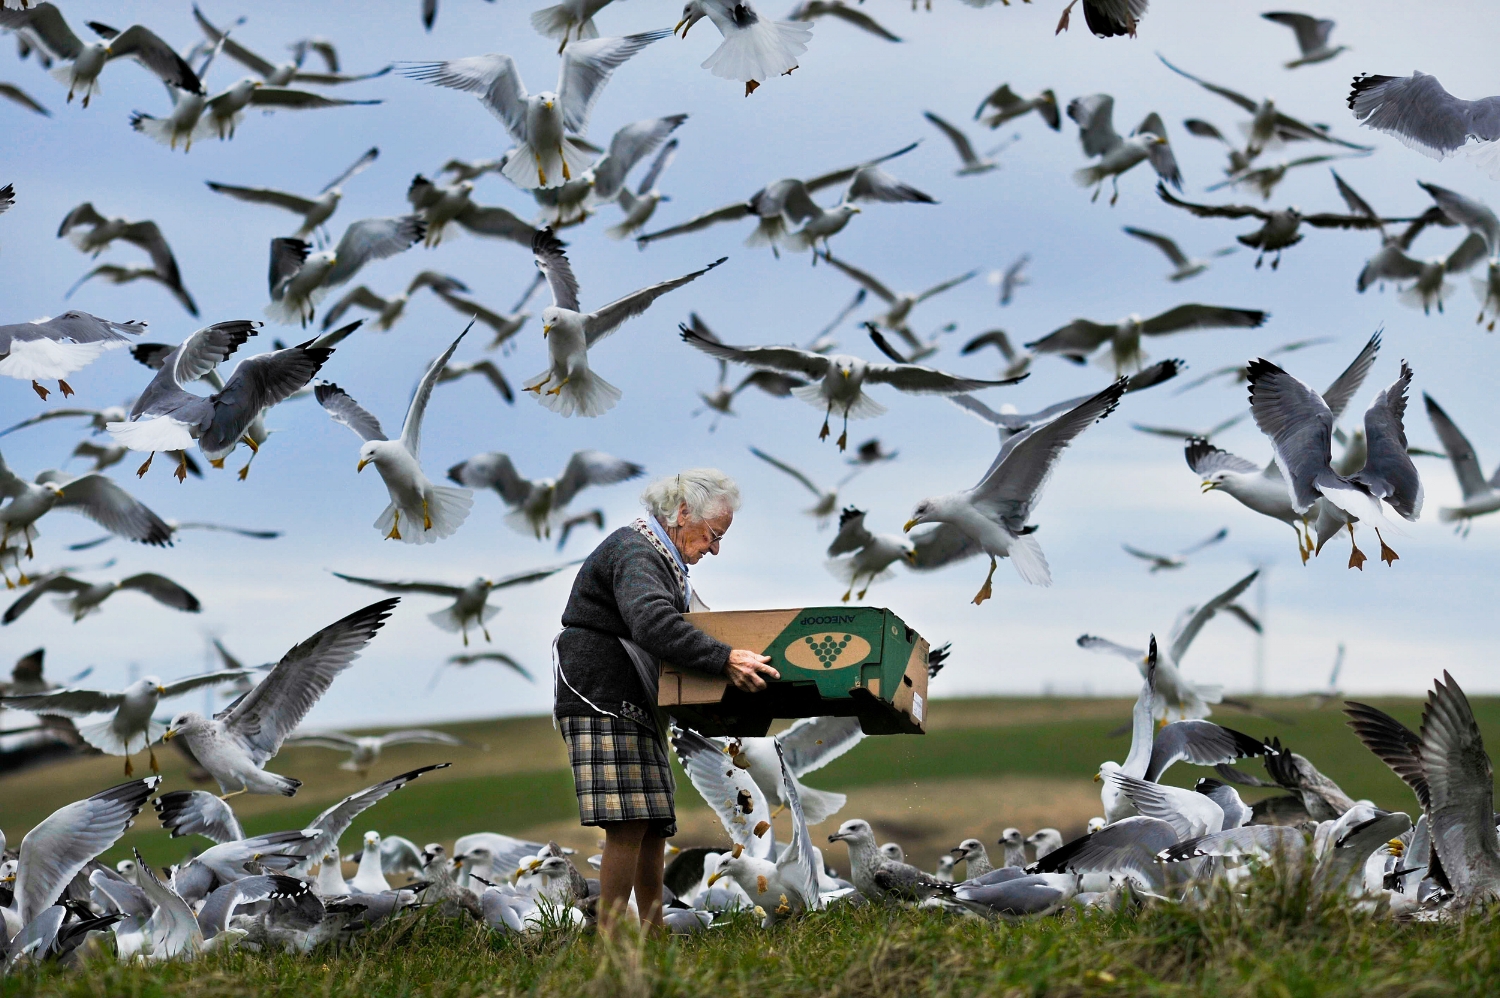  A woman feeds thousands of sea gulls from a box of leftovers on the seaside cliffs of Liencres, Spain. 